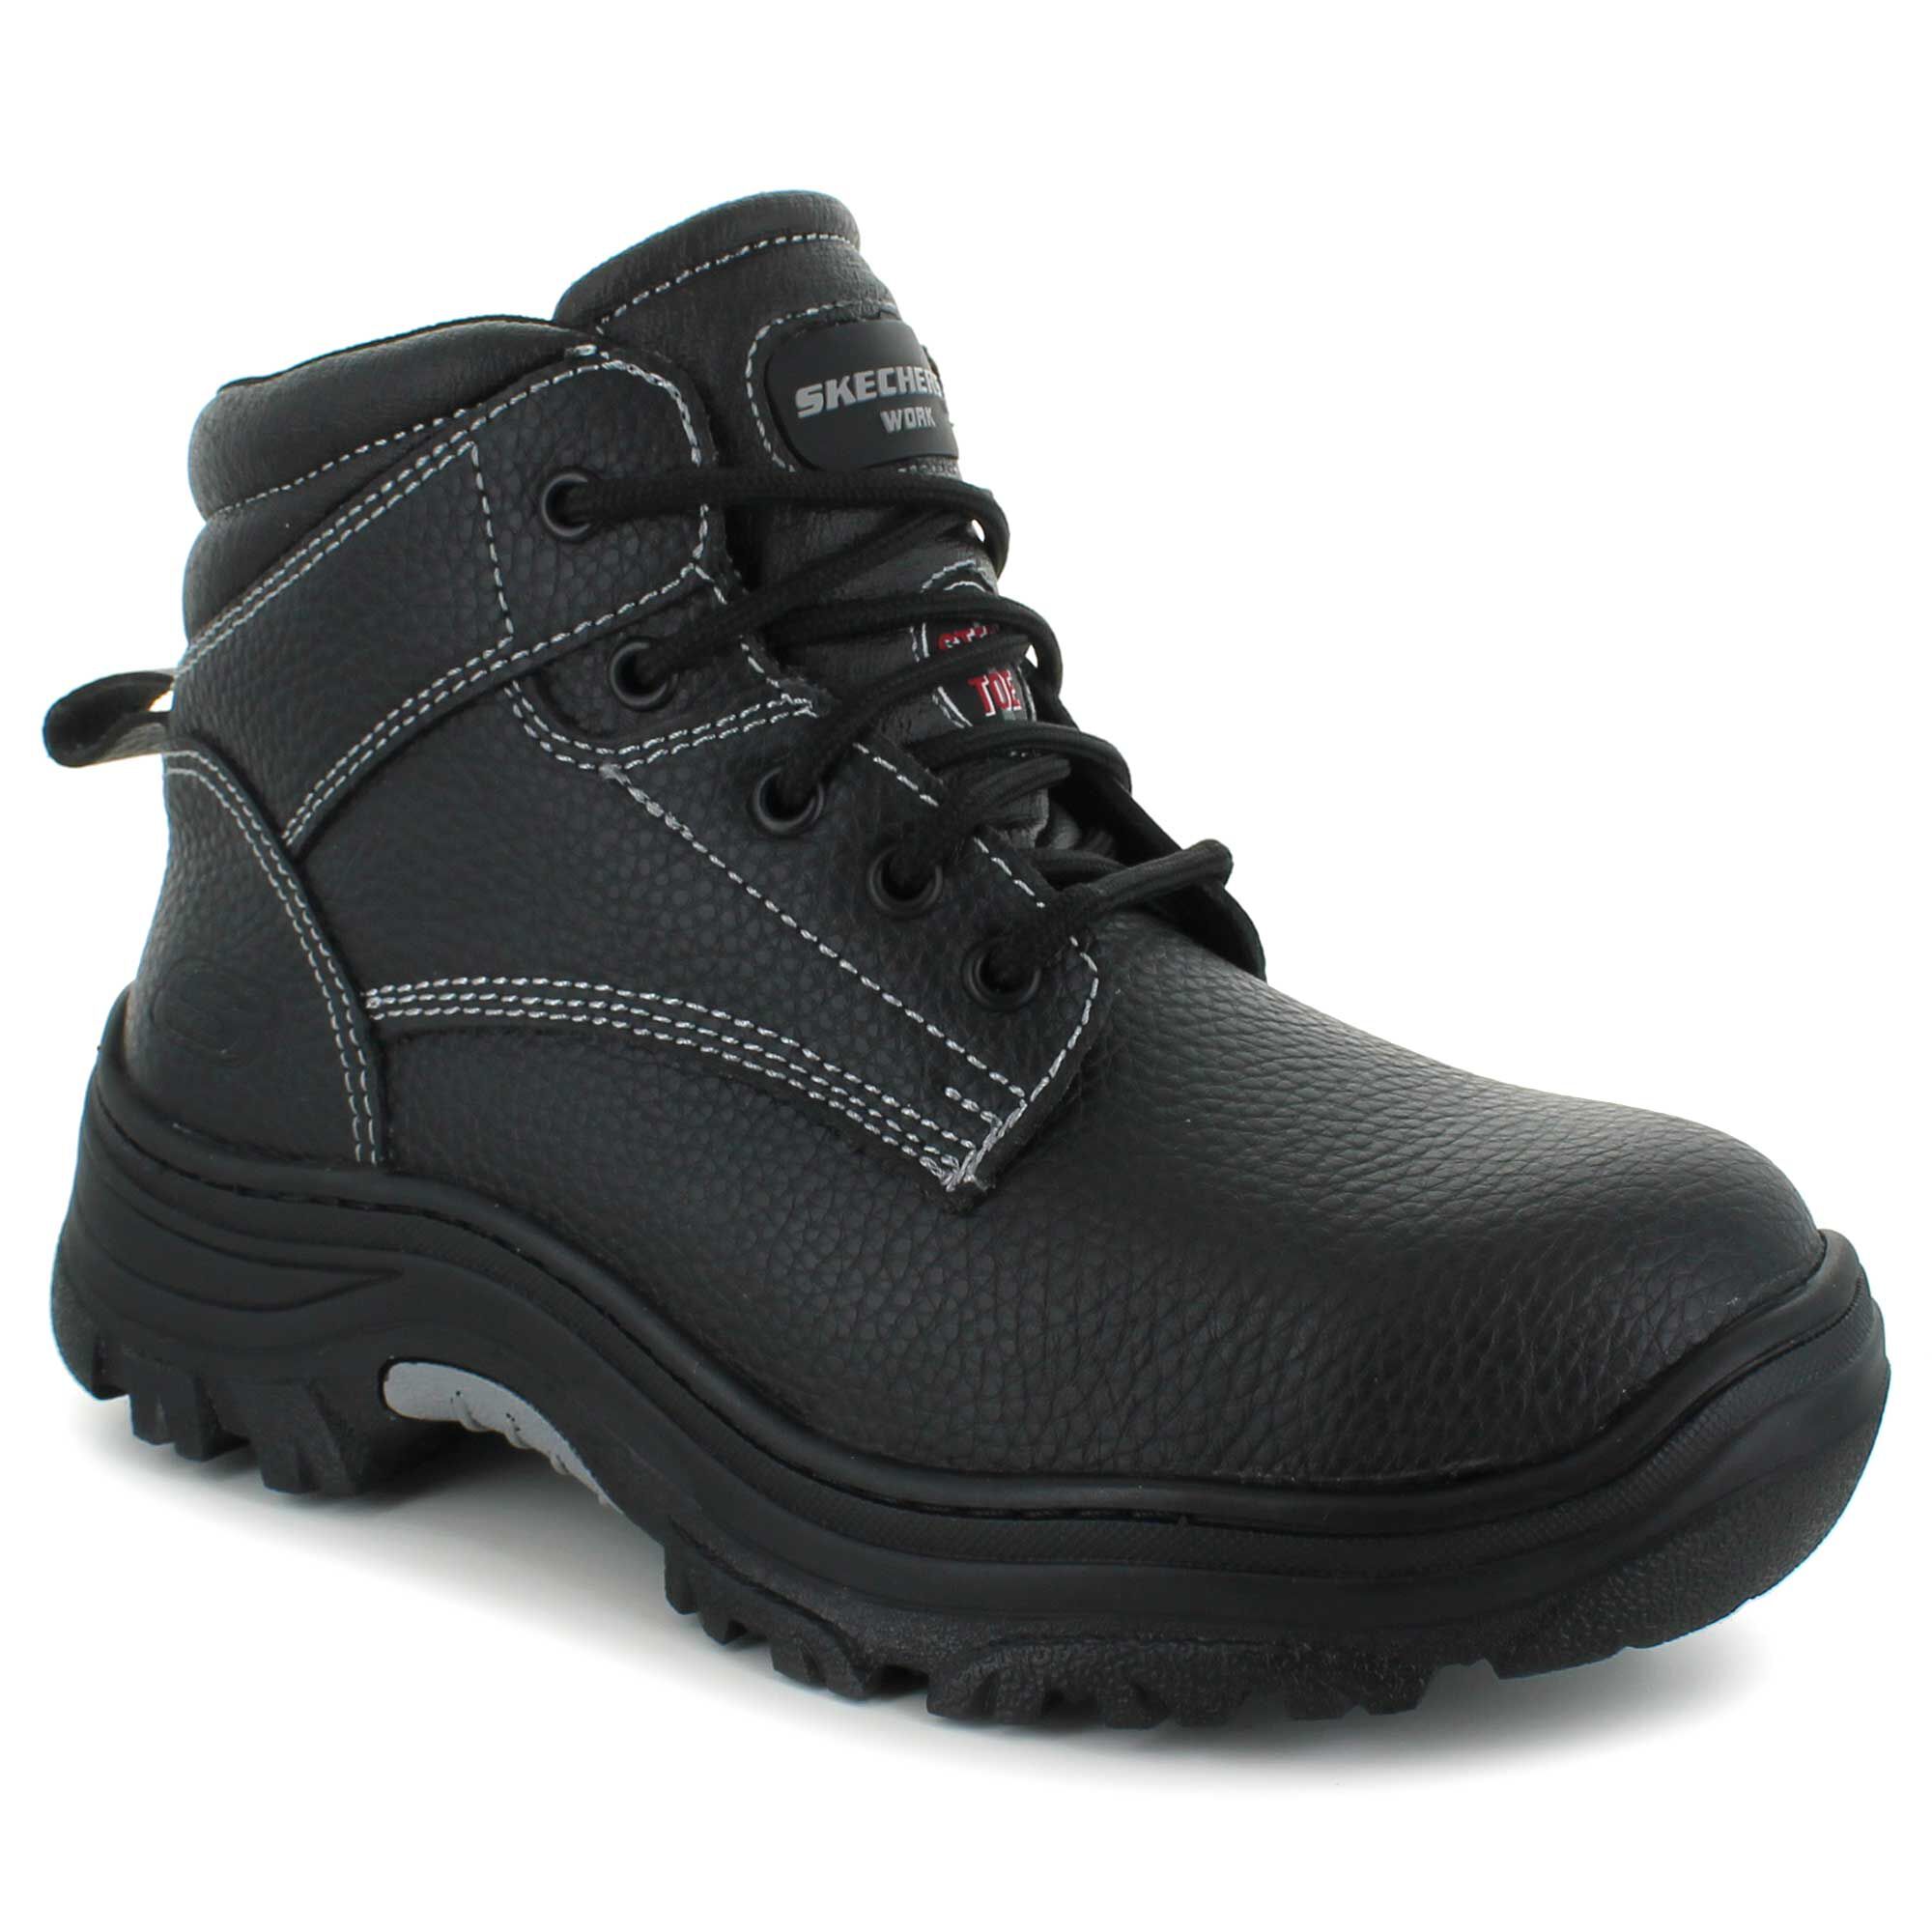 skechers safety shoes women